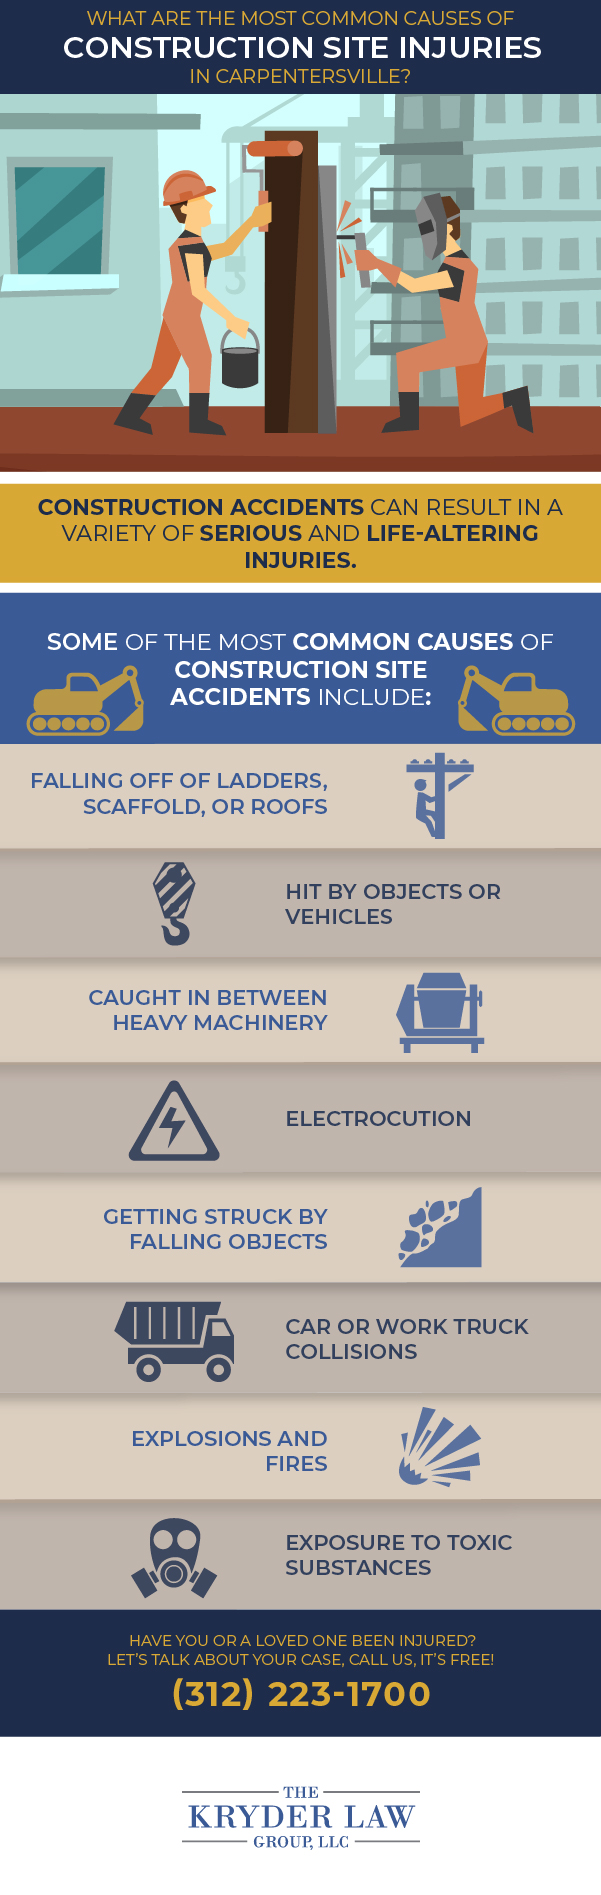 The Benefits of Hiring a Carpentersville Construction Accident Lawyer Infographic